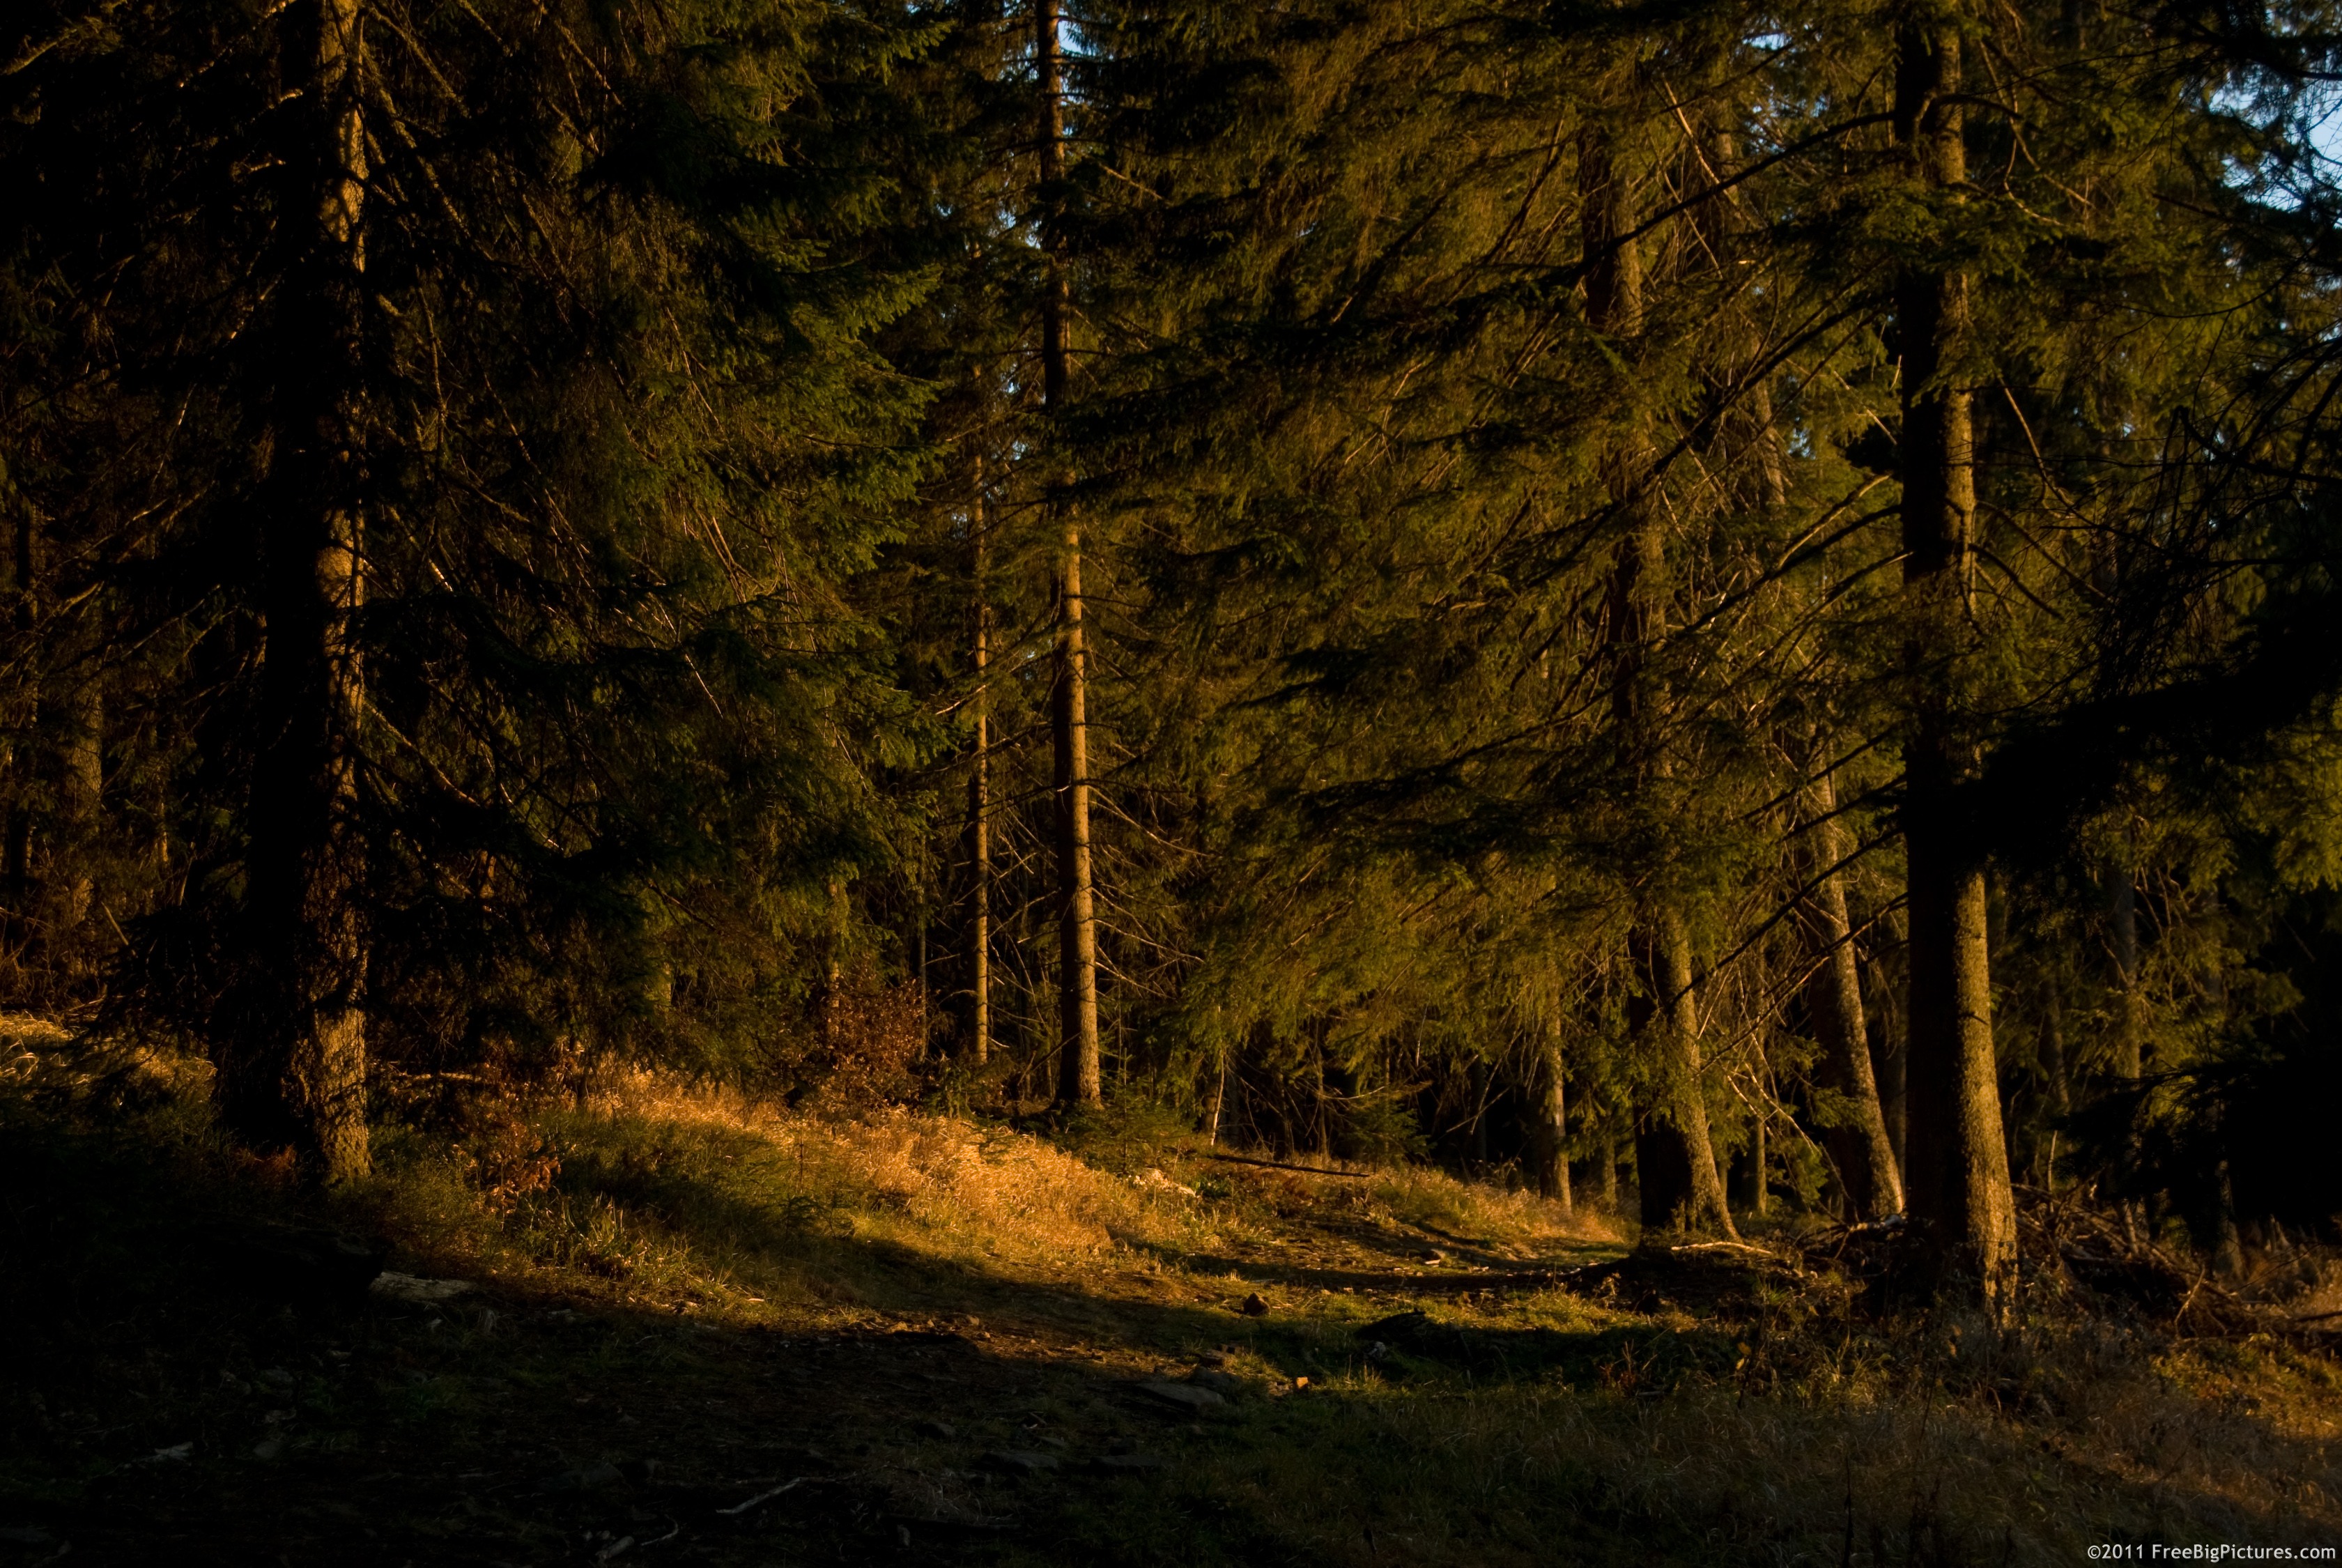 Forest surrounded in the warm light of the sunset